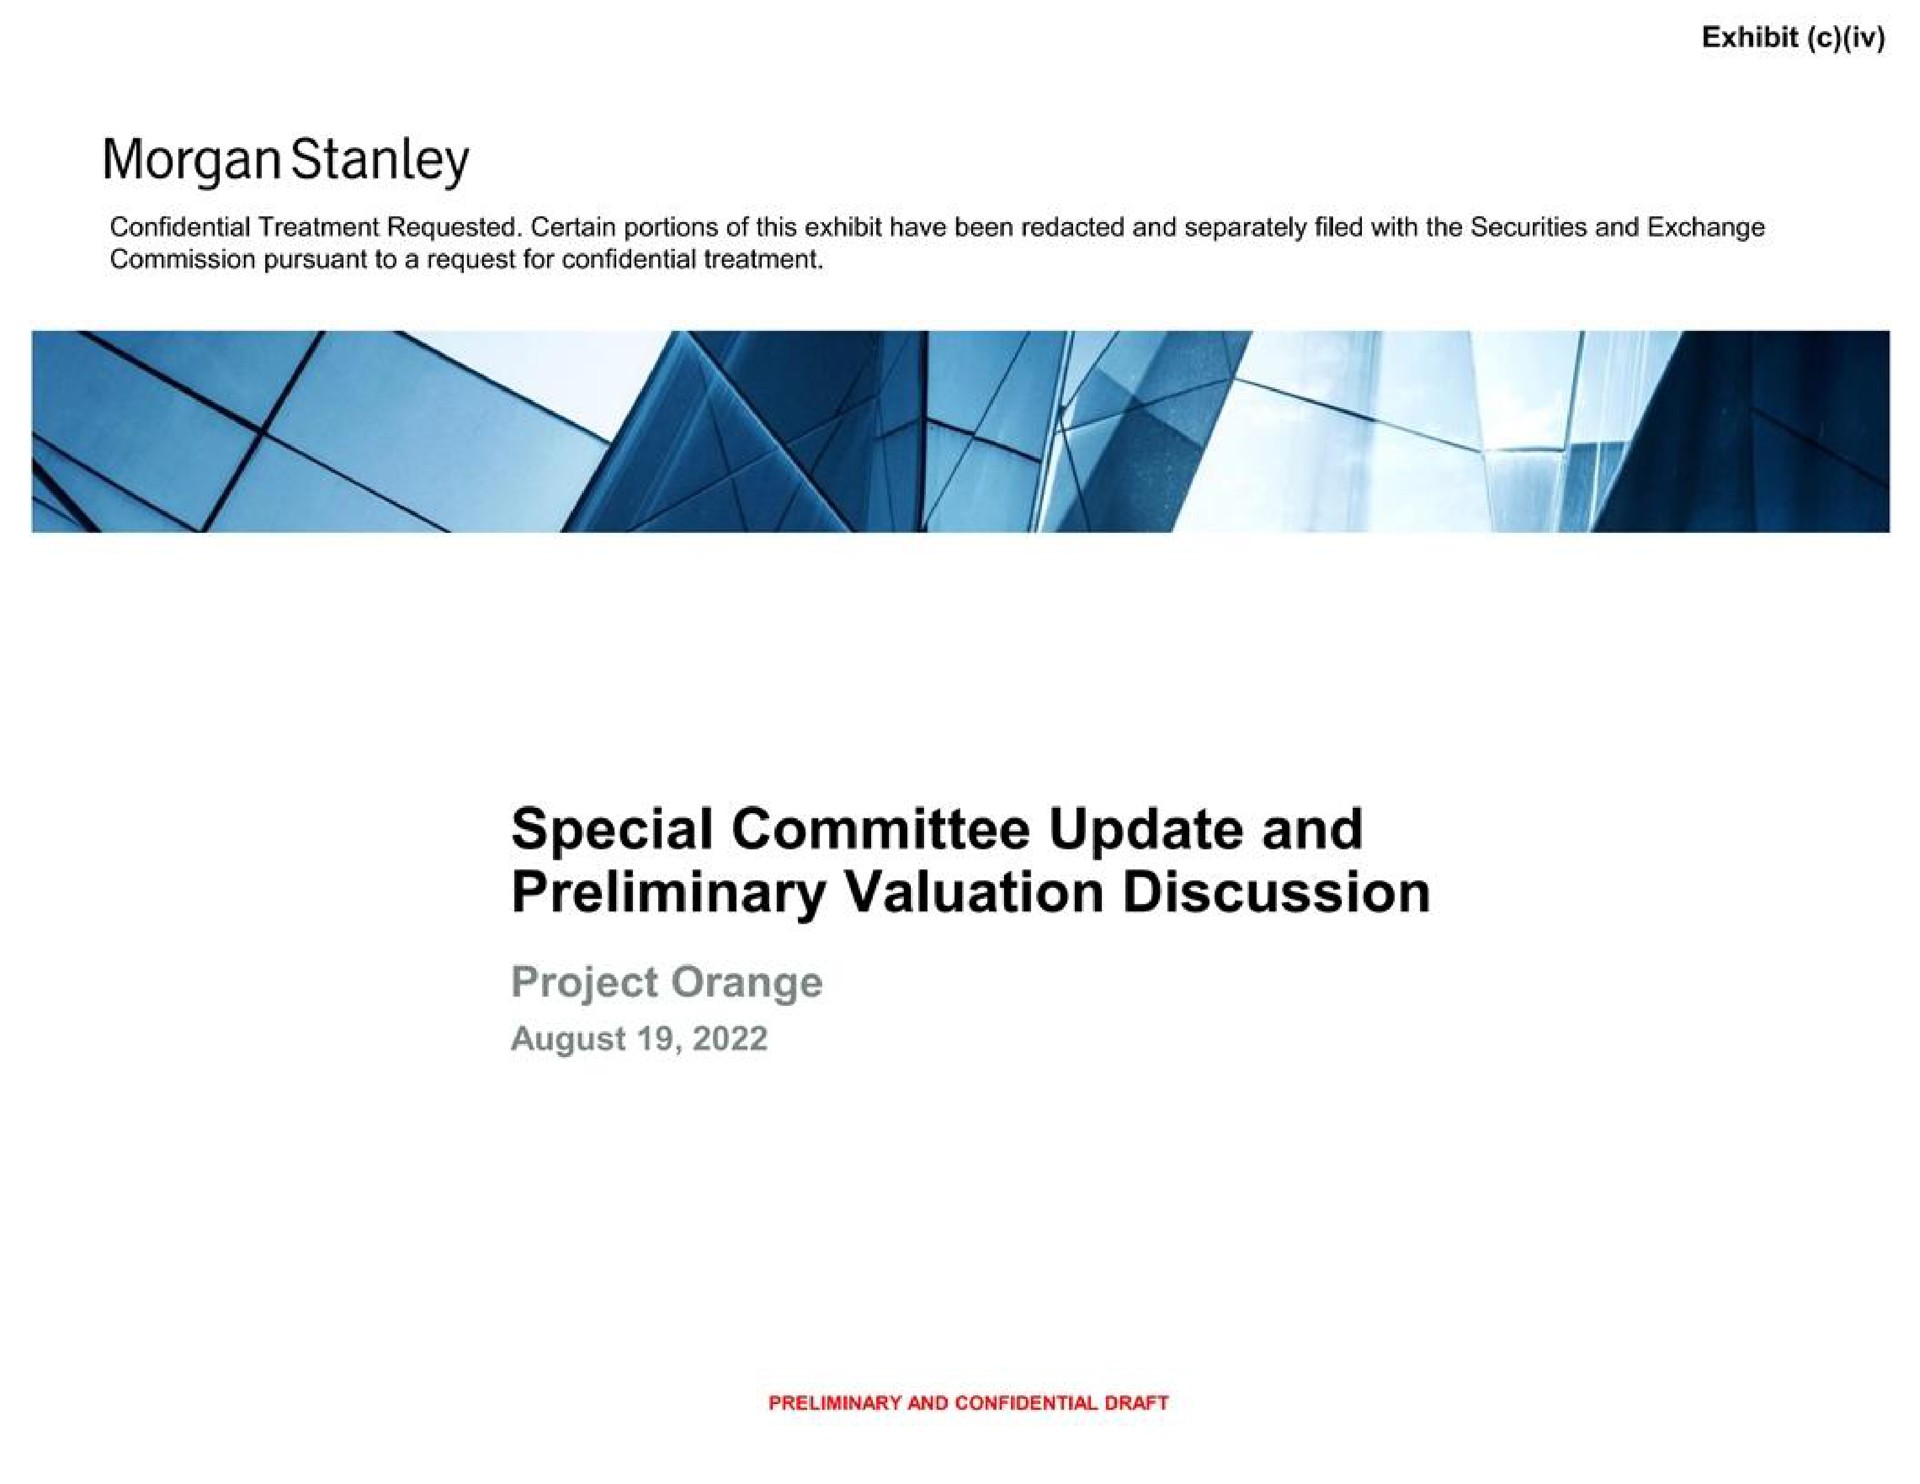 morgan special committee update and preliminary valuation discussion | Morgan Stanley